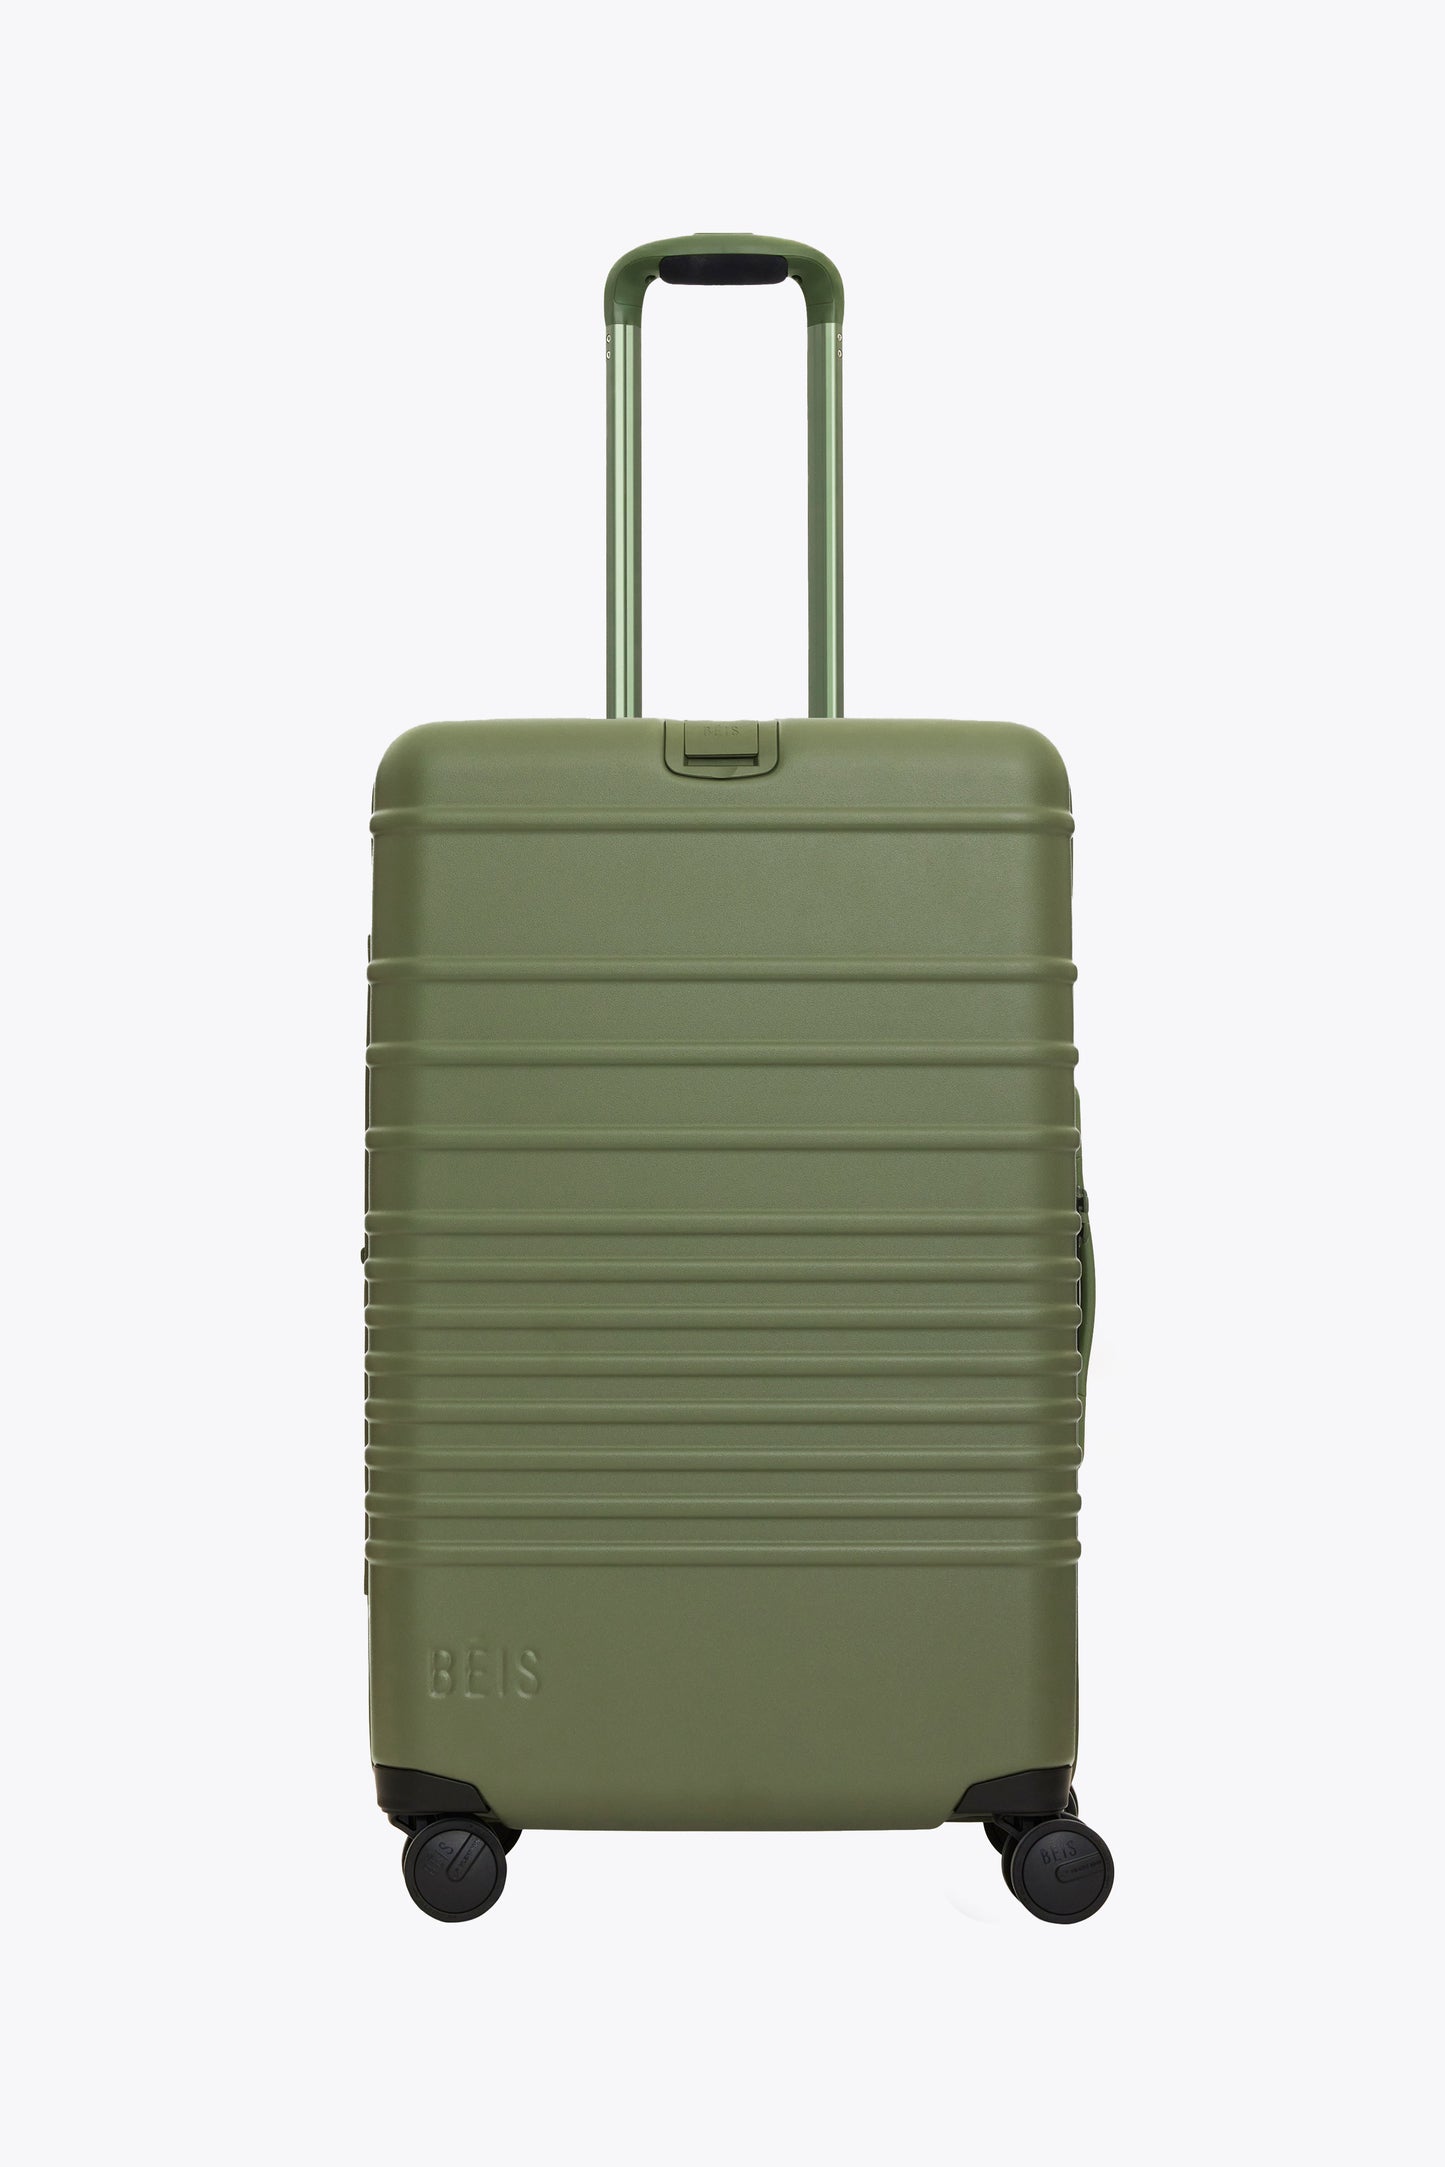 The 26" Check-In Roller in Olive